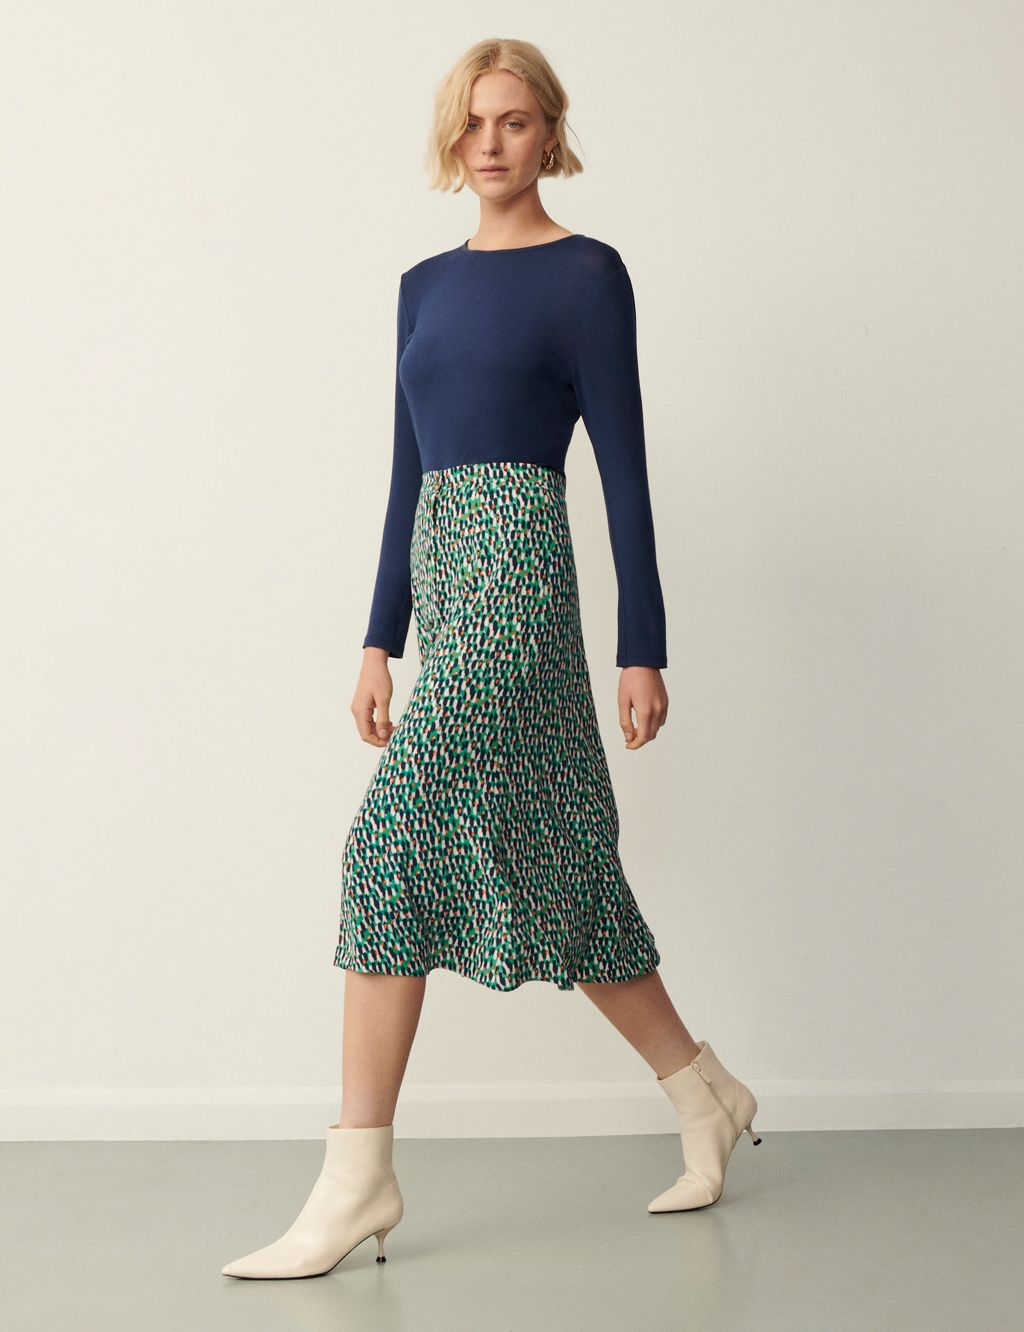 Printed Button Front Midi A-Line Skirt image 2